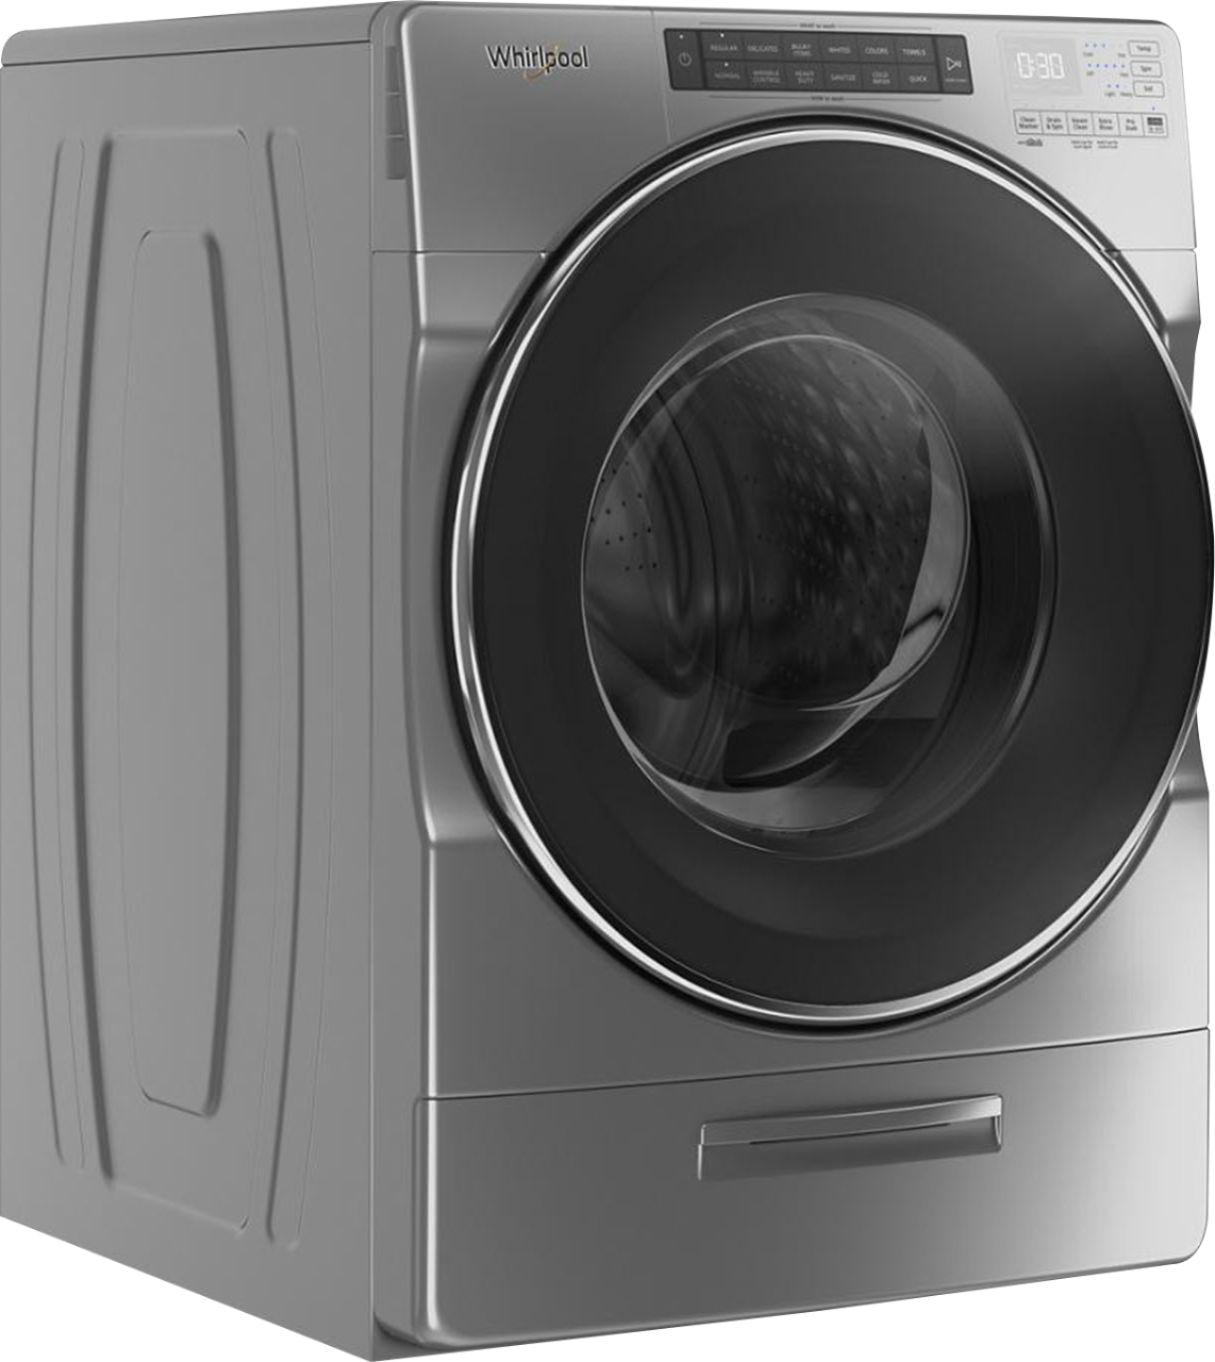 Angle View: Whirlpool - 4.5 Cu. Ft. High Efficiency Stackable Front Load Washer with Steam and Load & Go XL Dispenser - Chrome shadow